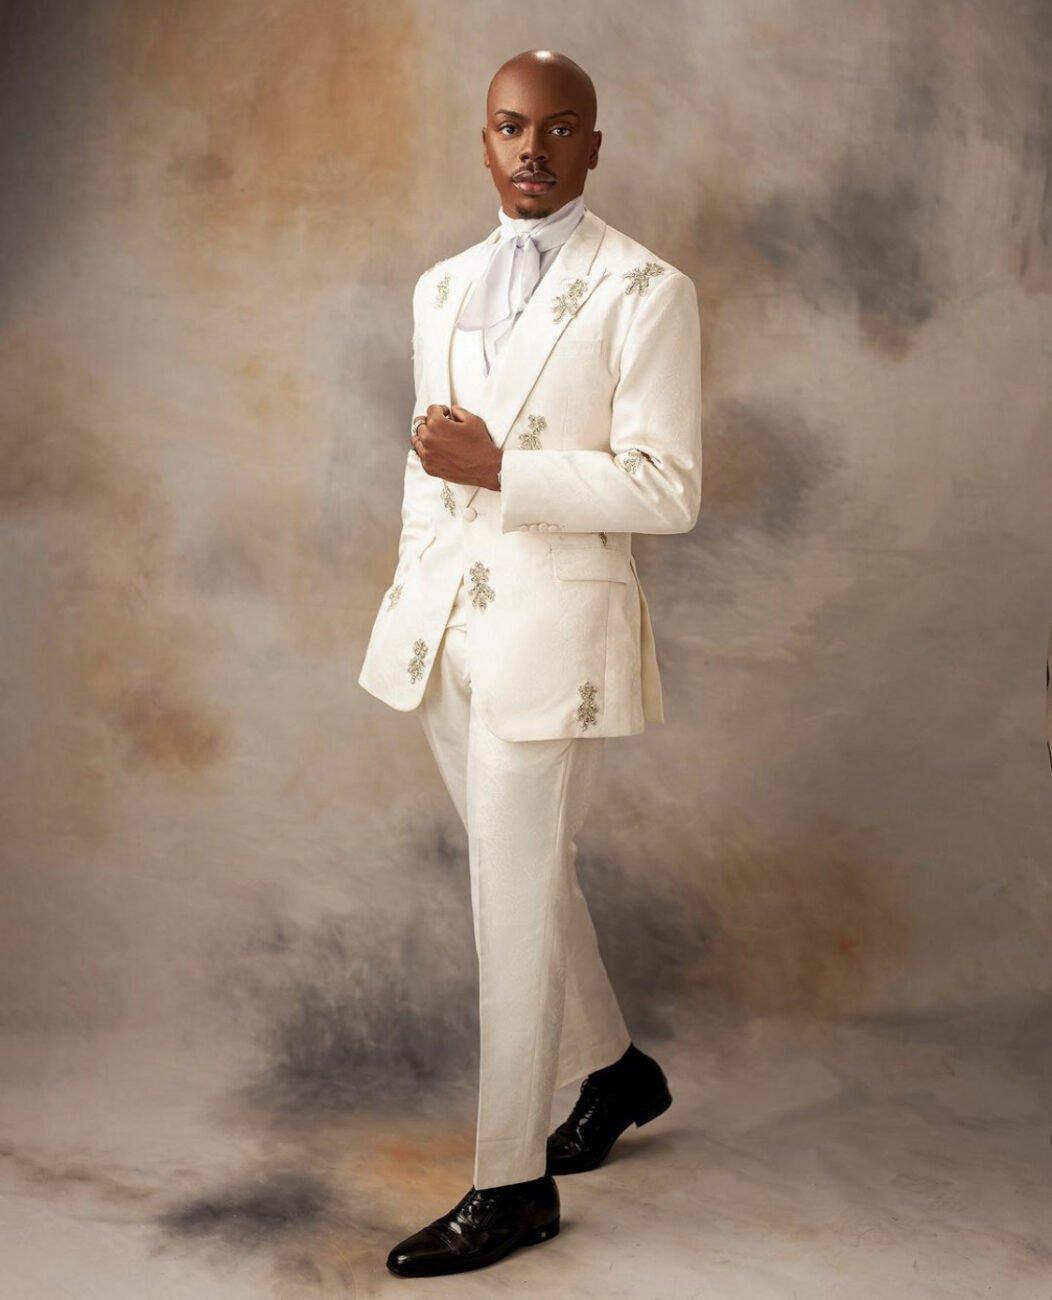 Enioluwa Adeoluwa in a classy white suit with embroidery designs on the jacket.